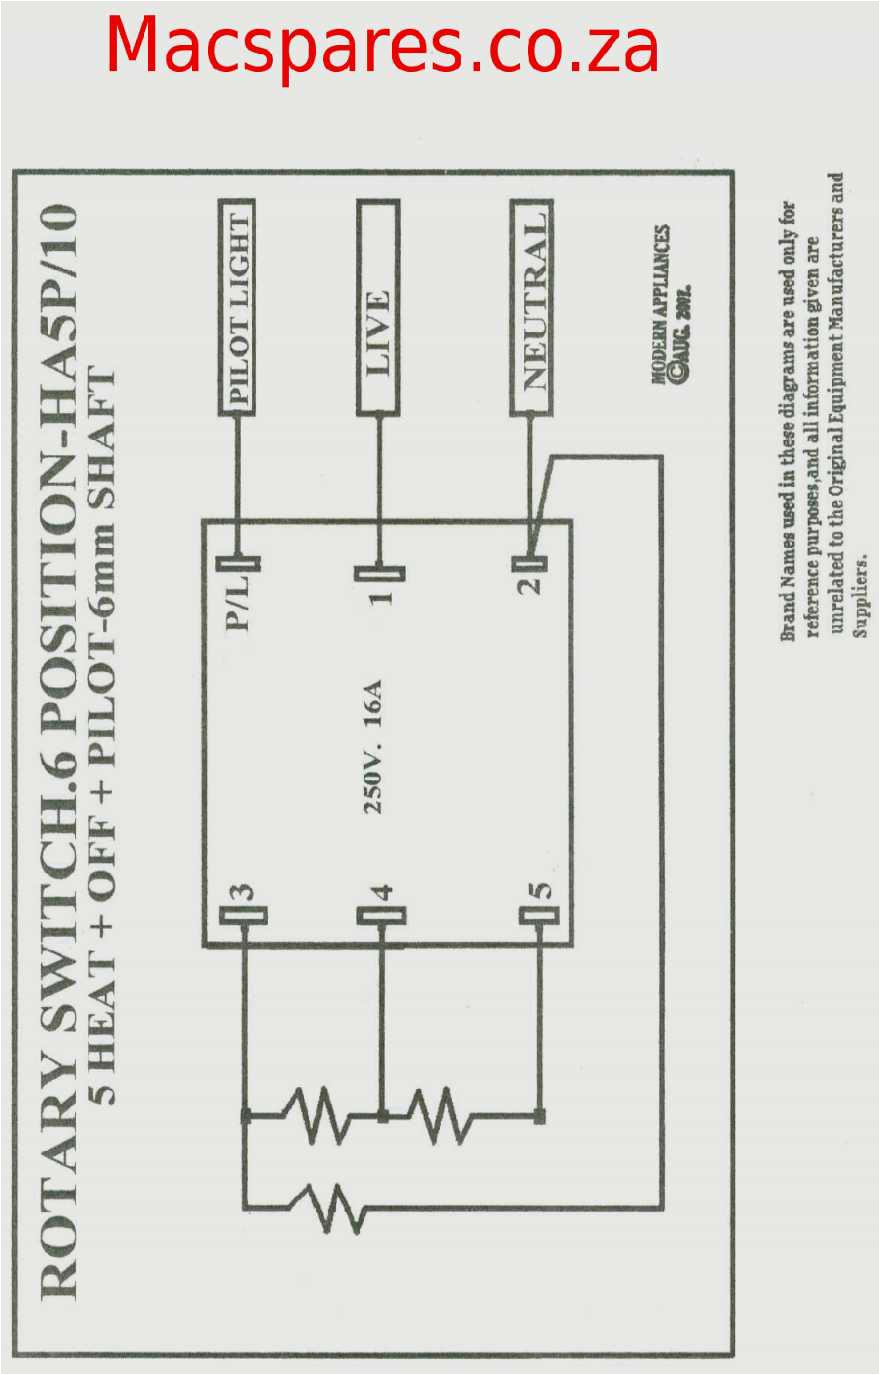 sunvic room thermostat wiring diagram two plate hotplate connection a 71 th thermostat